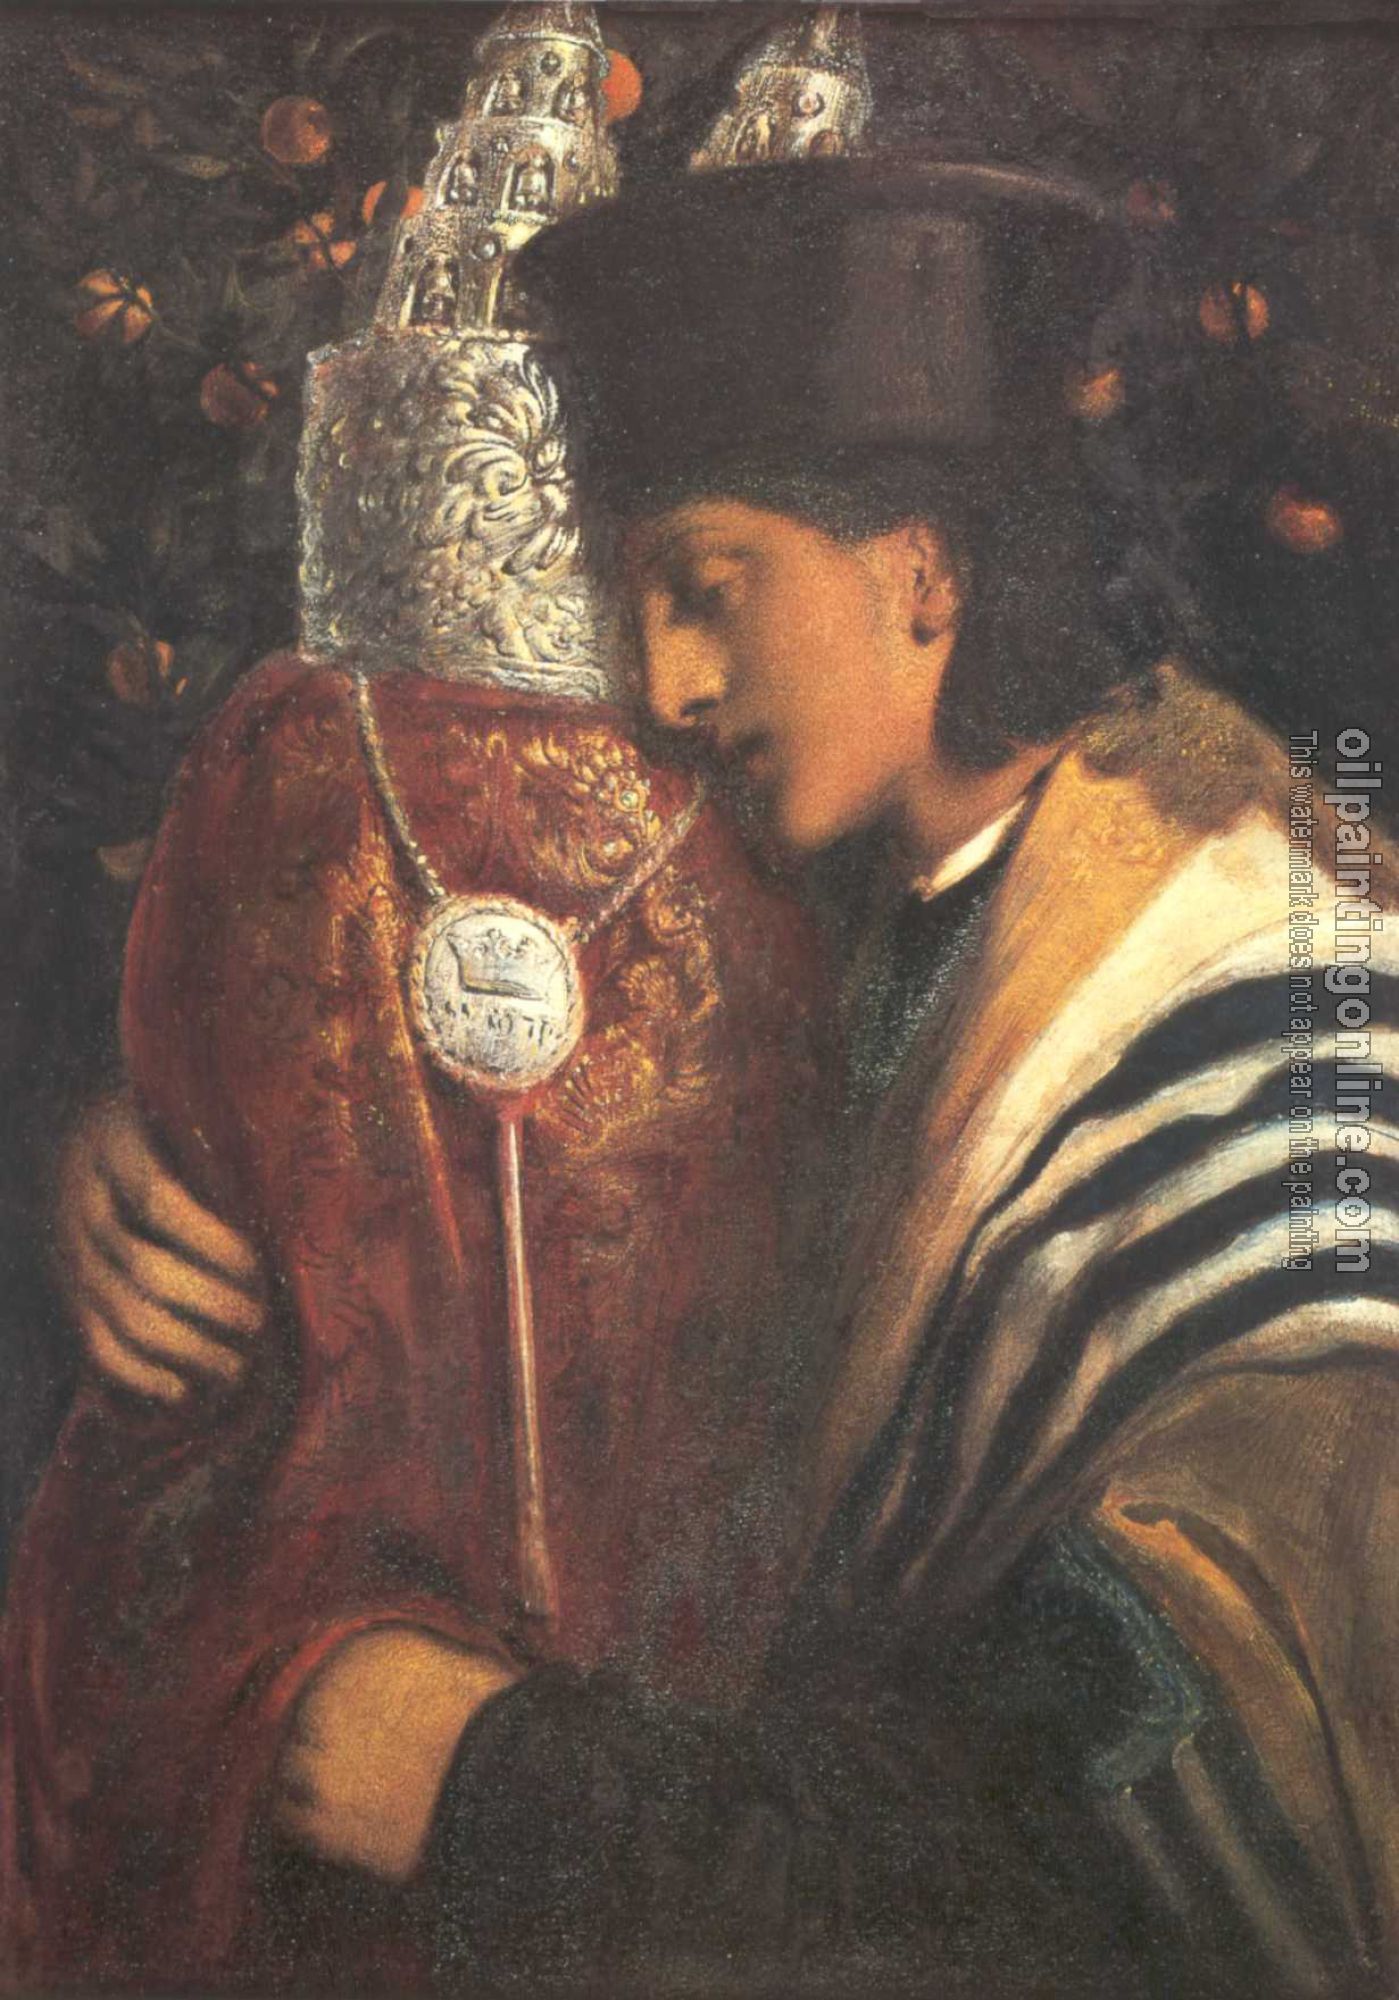 Oil Painting Reproduction - Jewish art